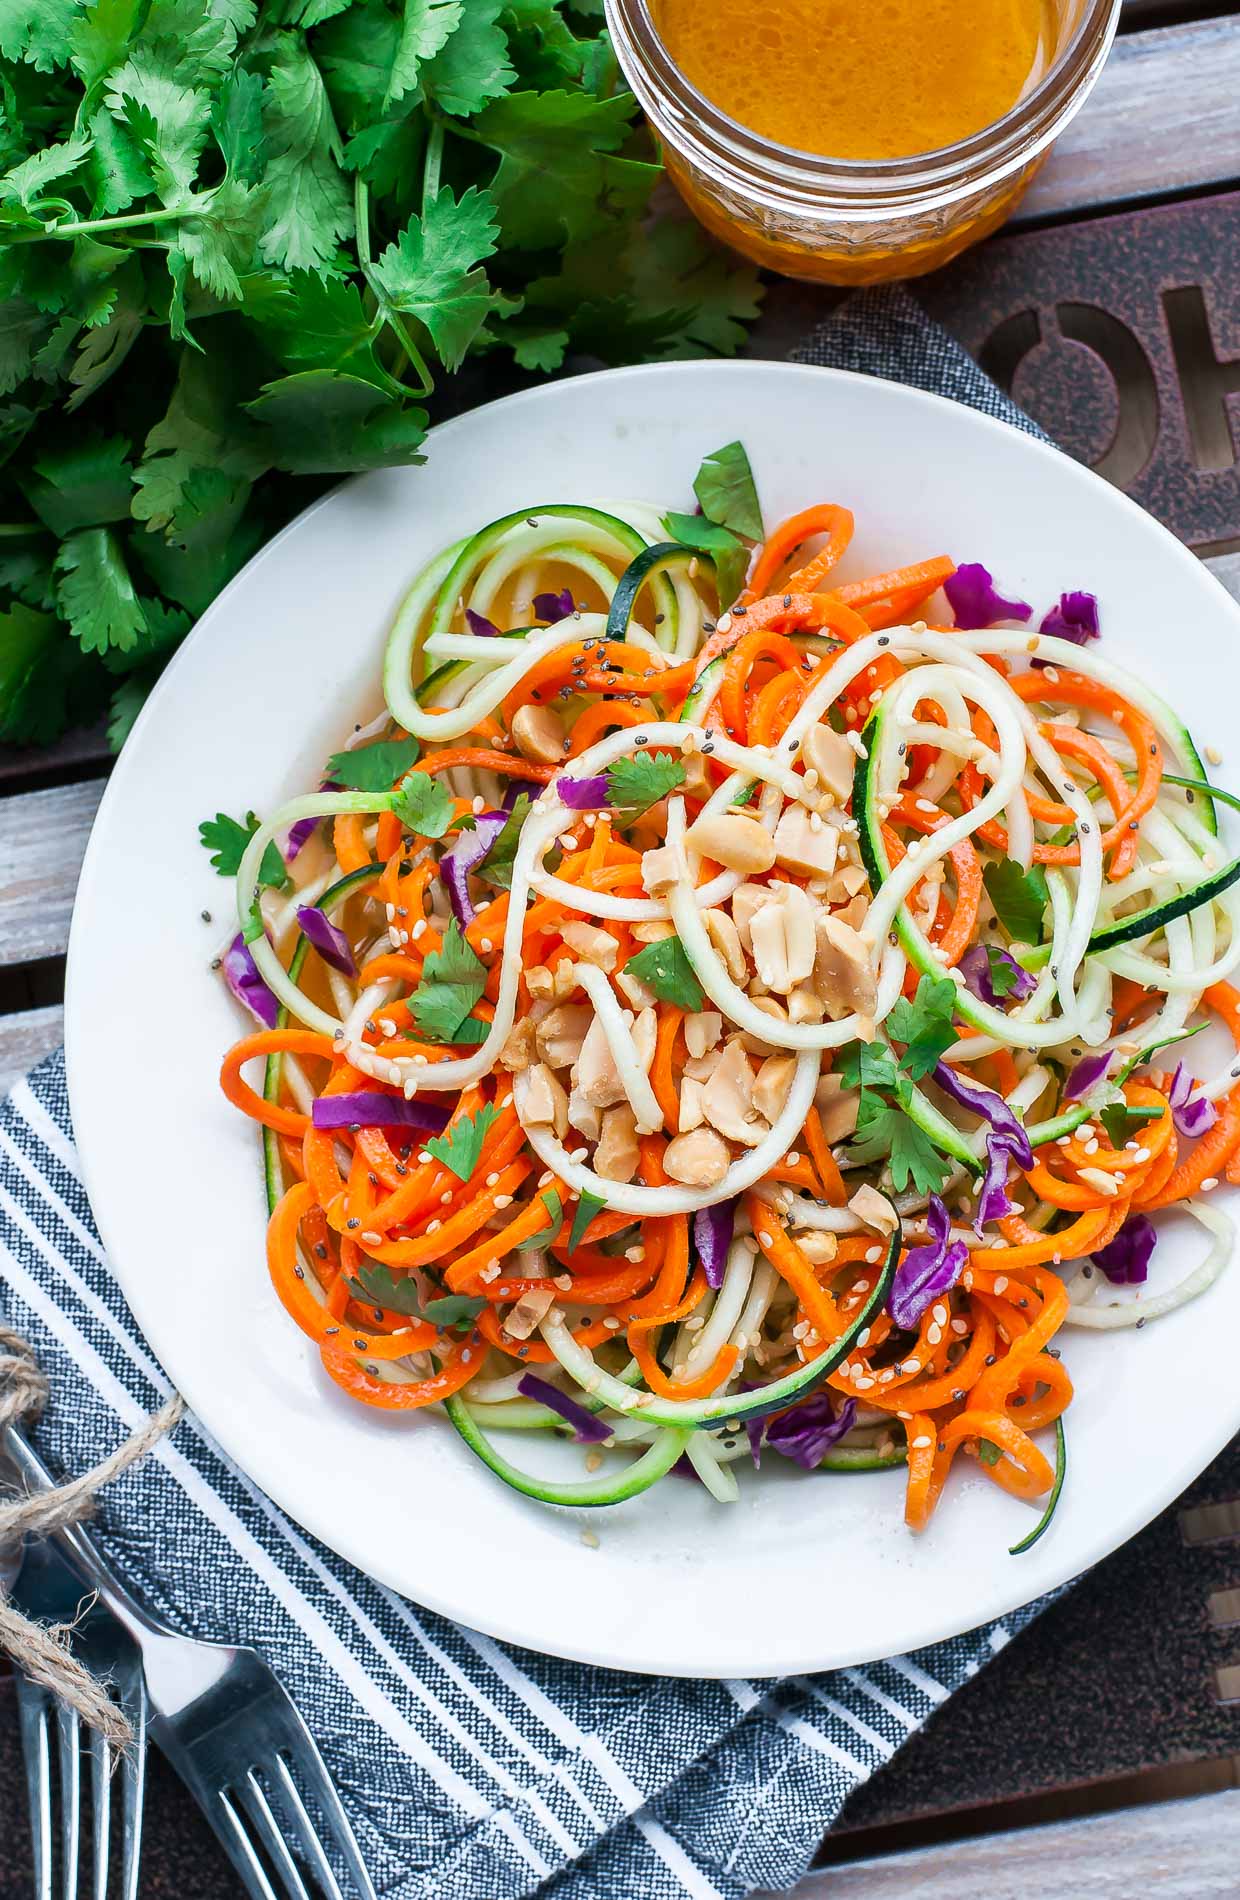 Spiralized Thai Zucchini Noodle Salad with Sriracha Dressing because, YUM! This gorgeous gluten-free salad features a medley of colorful veggies and is topped with peanuts, cilantro, and a tasty homemade dressing.